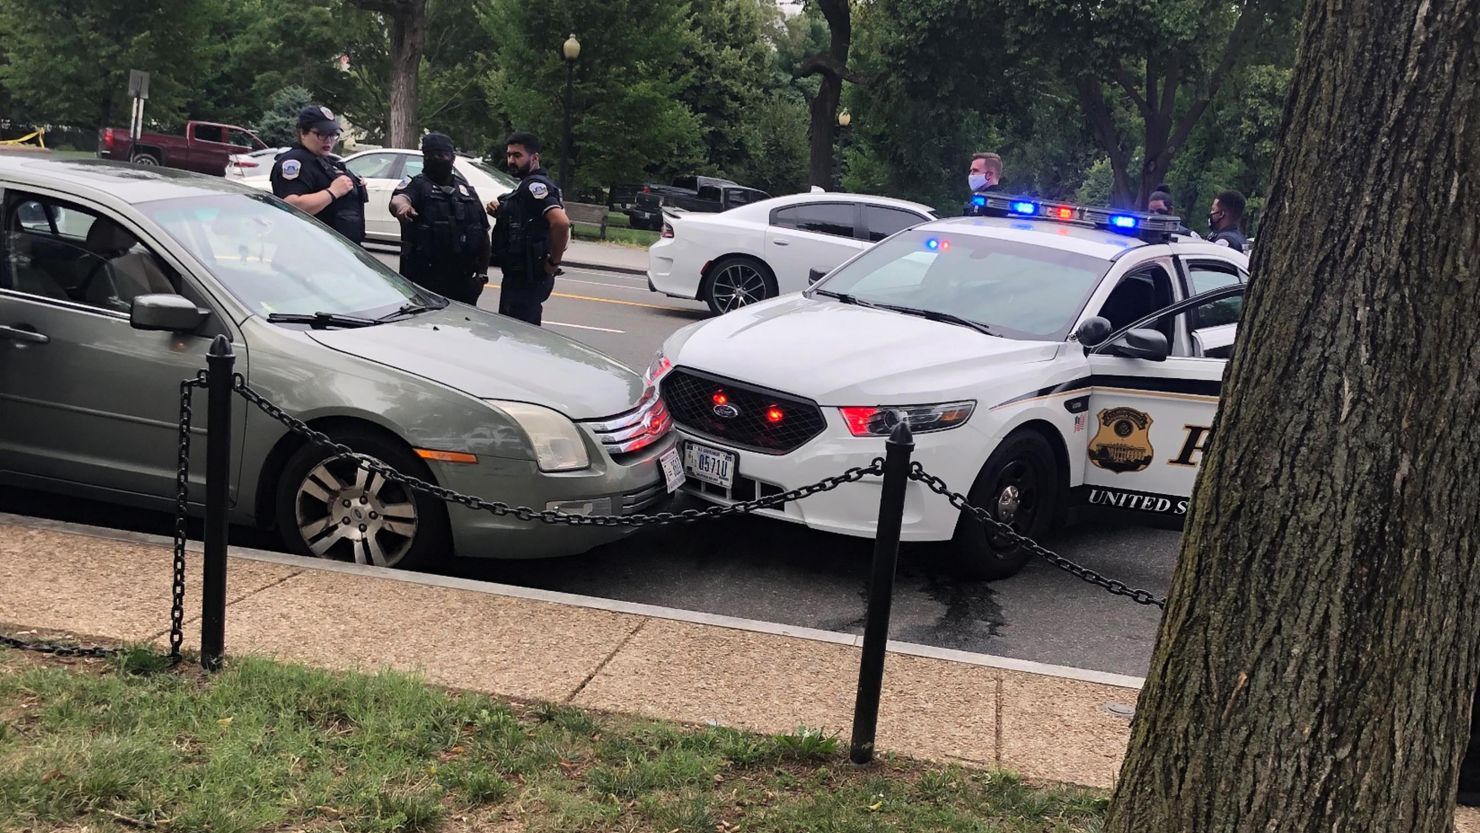 Scene following an alleged incident with the Secret Service at the National Mall in Washington, DC.